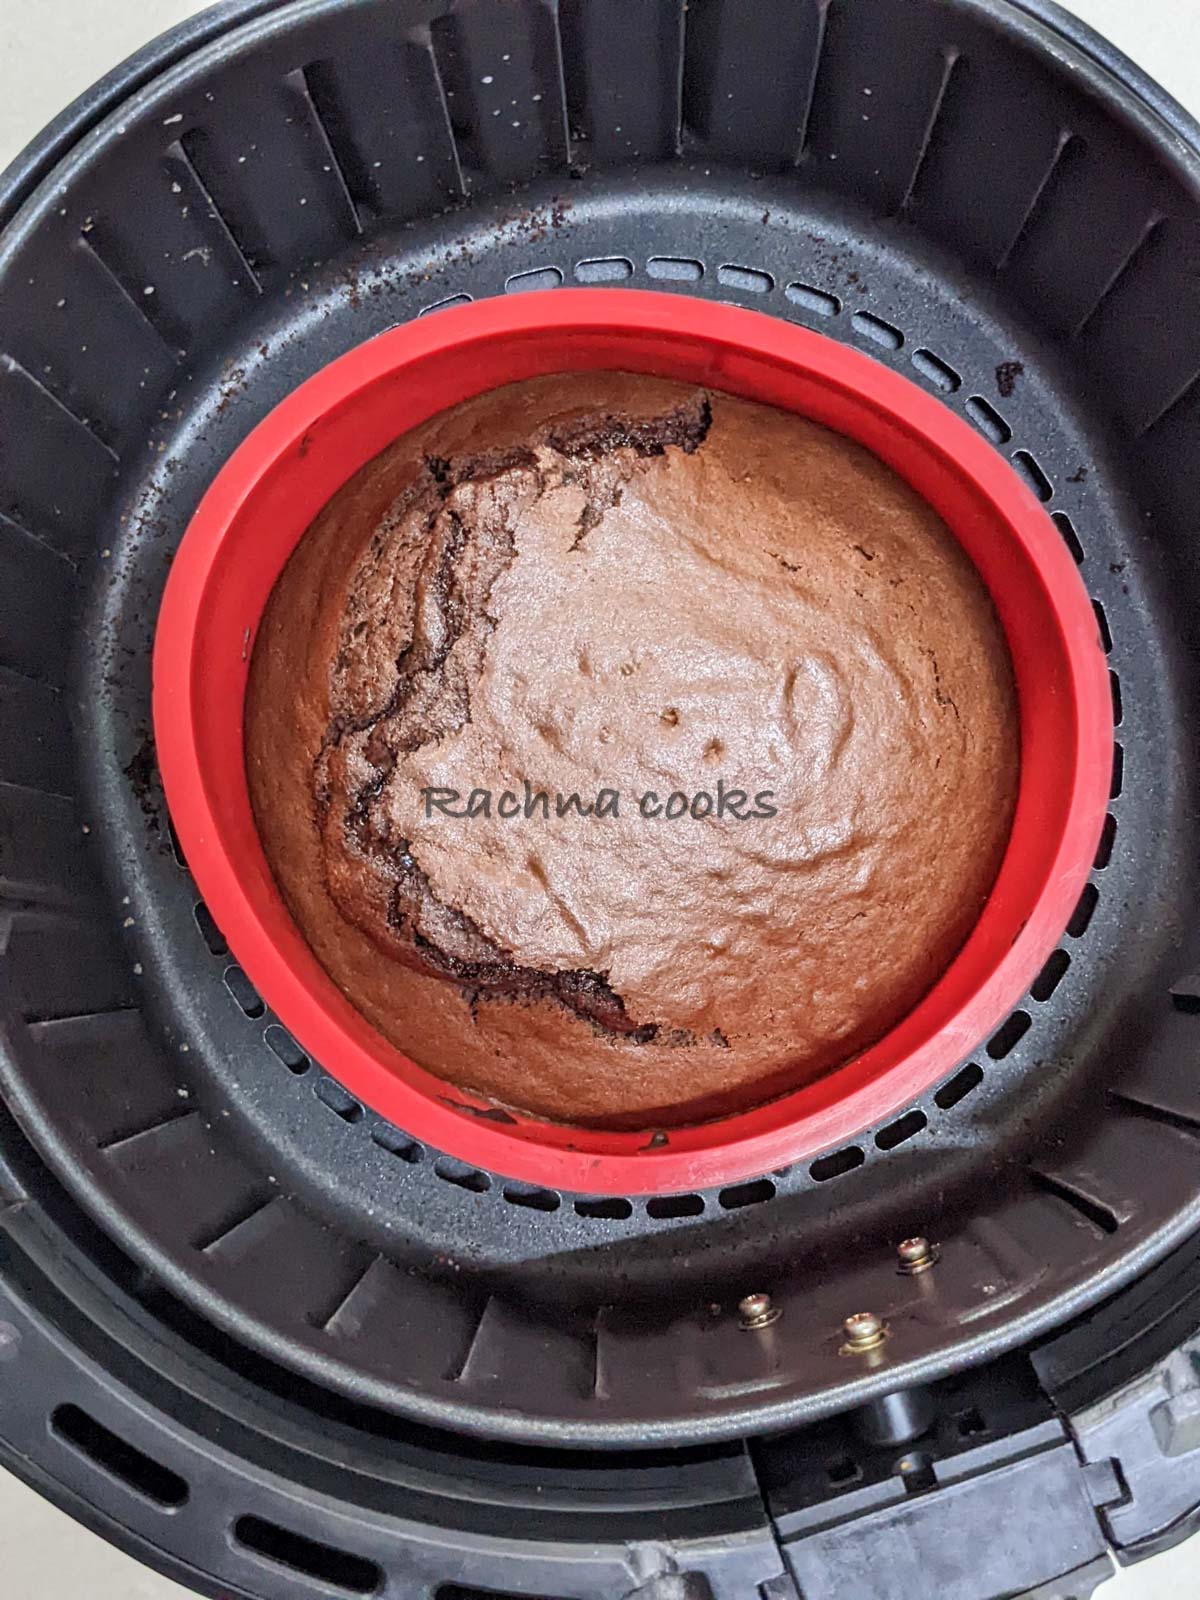 Chocolate cake after air frying in a red cake mould in air fryer basket.